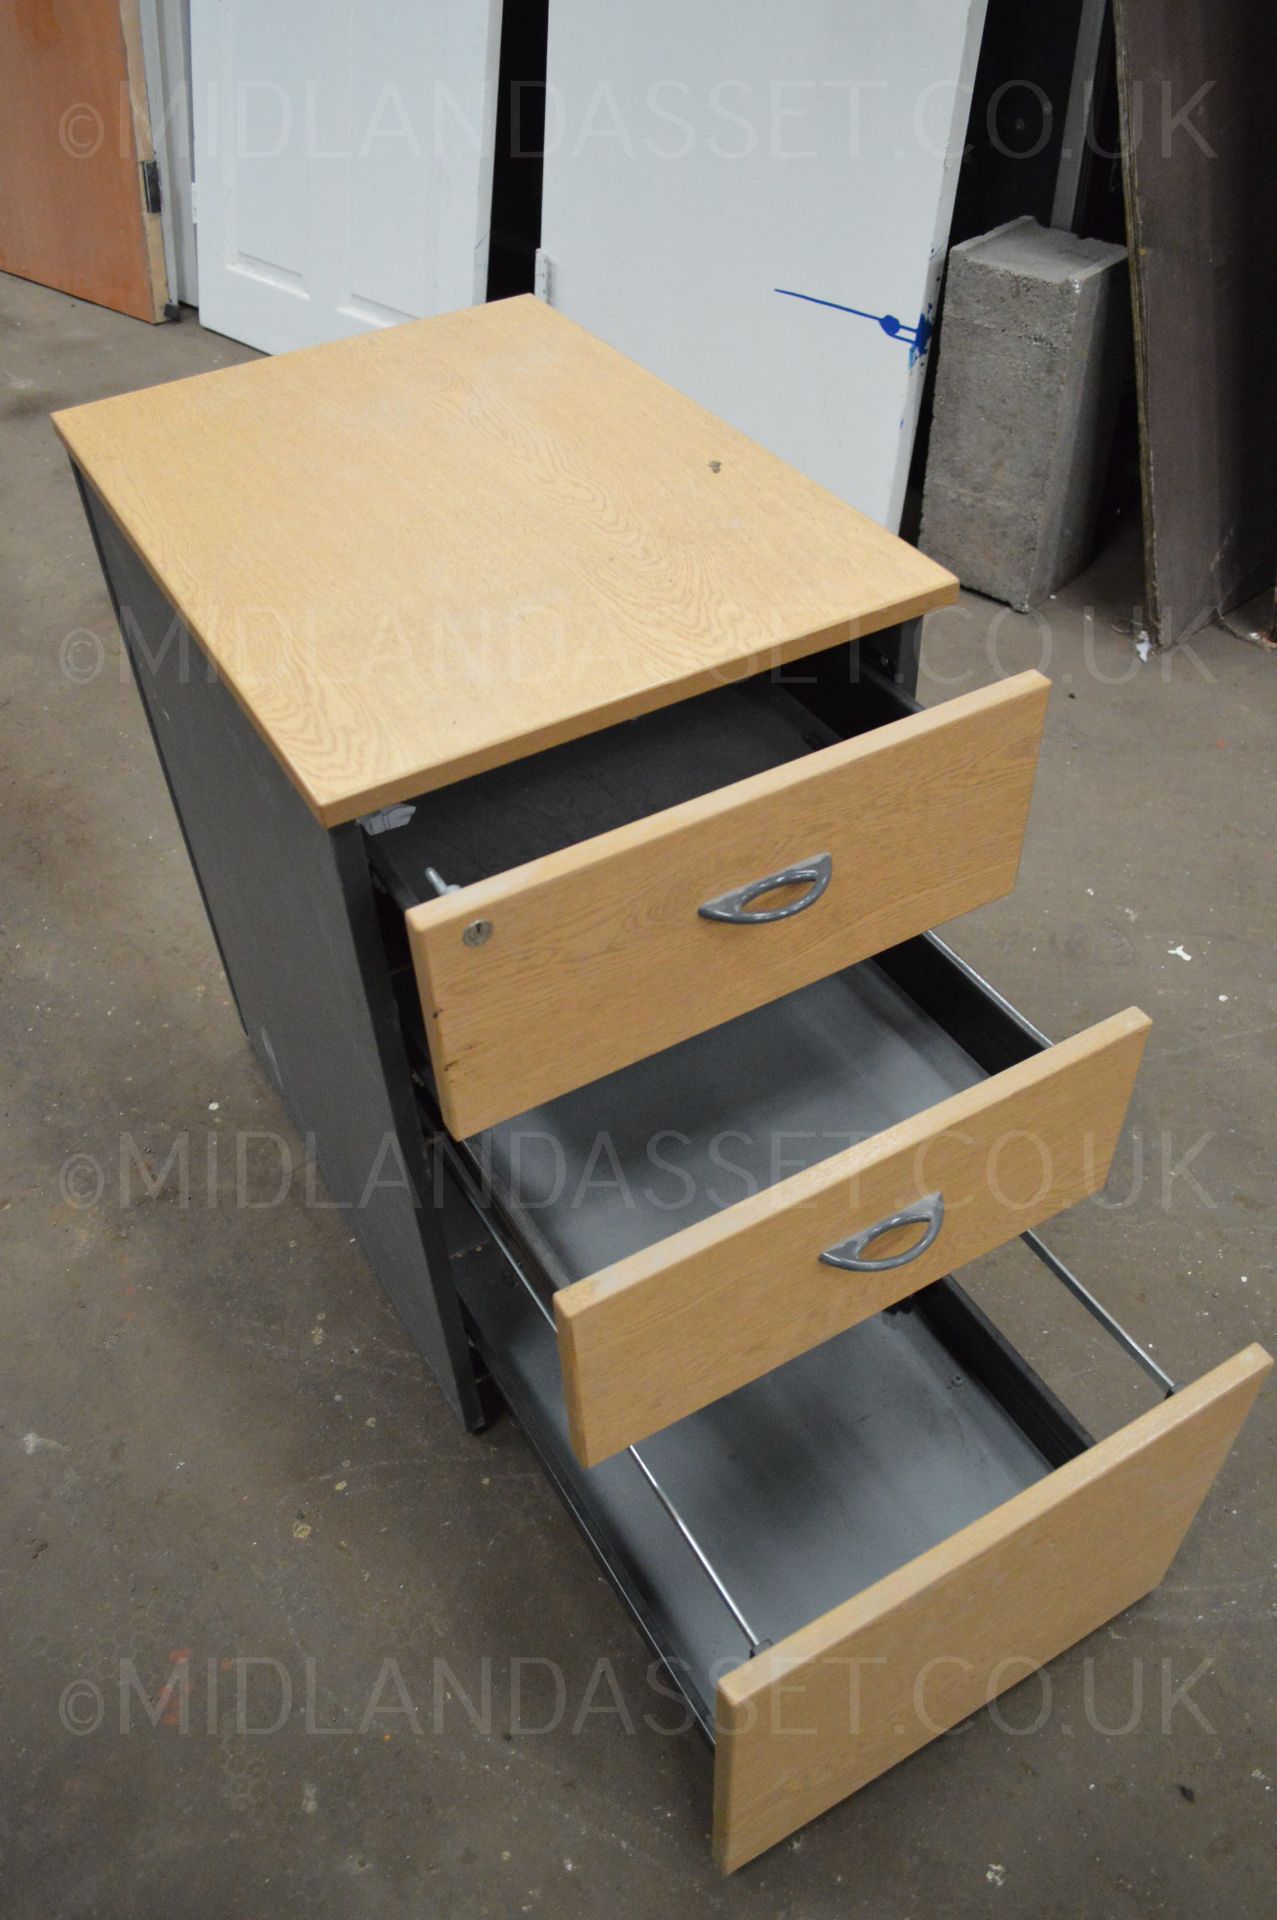 OAK OFFICE DRAWERS WITH WHEELS - USED CONDITION - Image 3 of 4